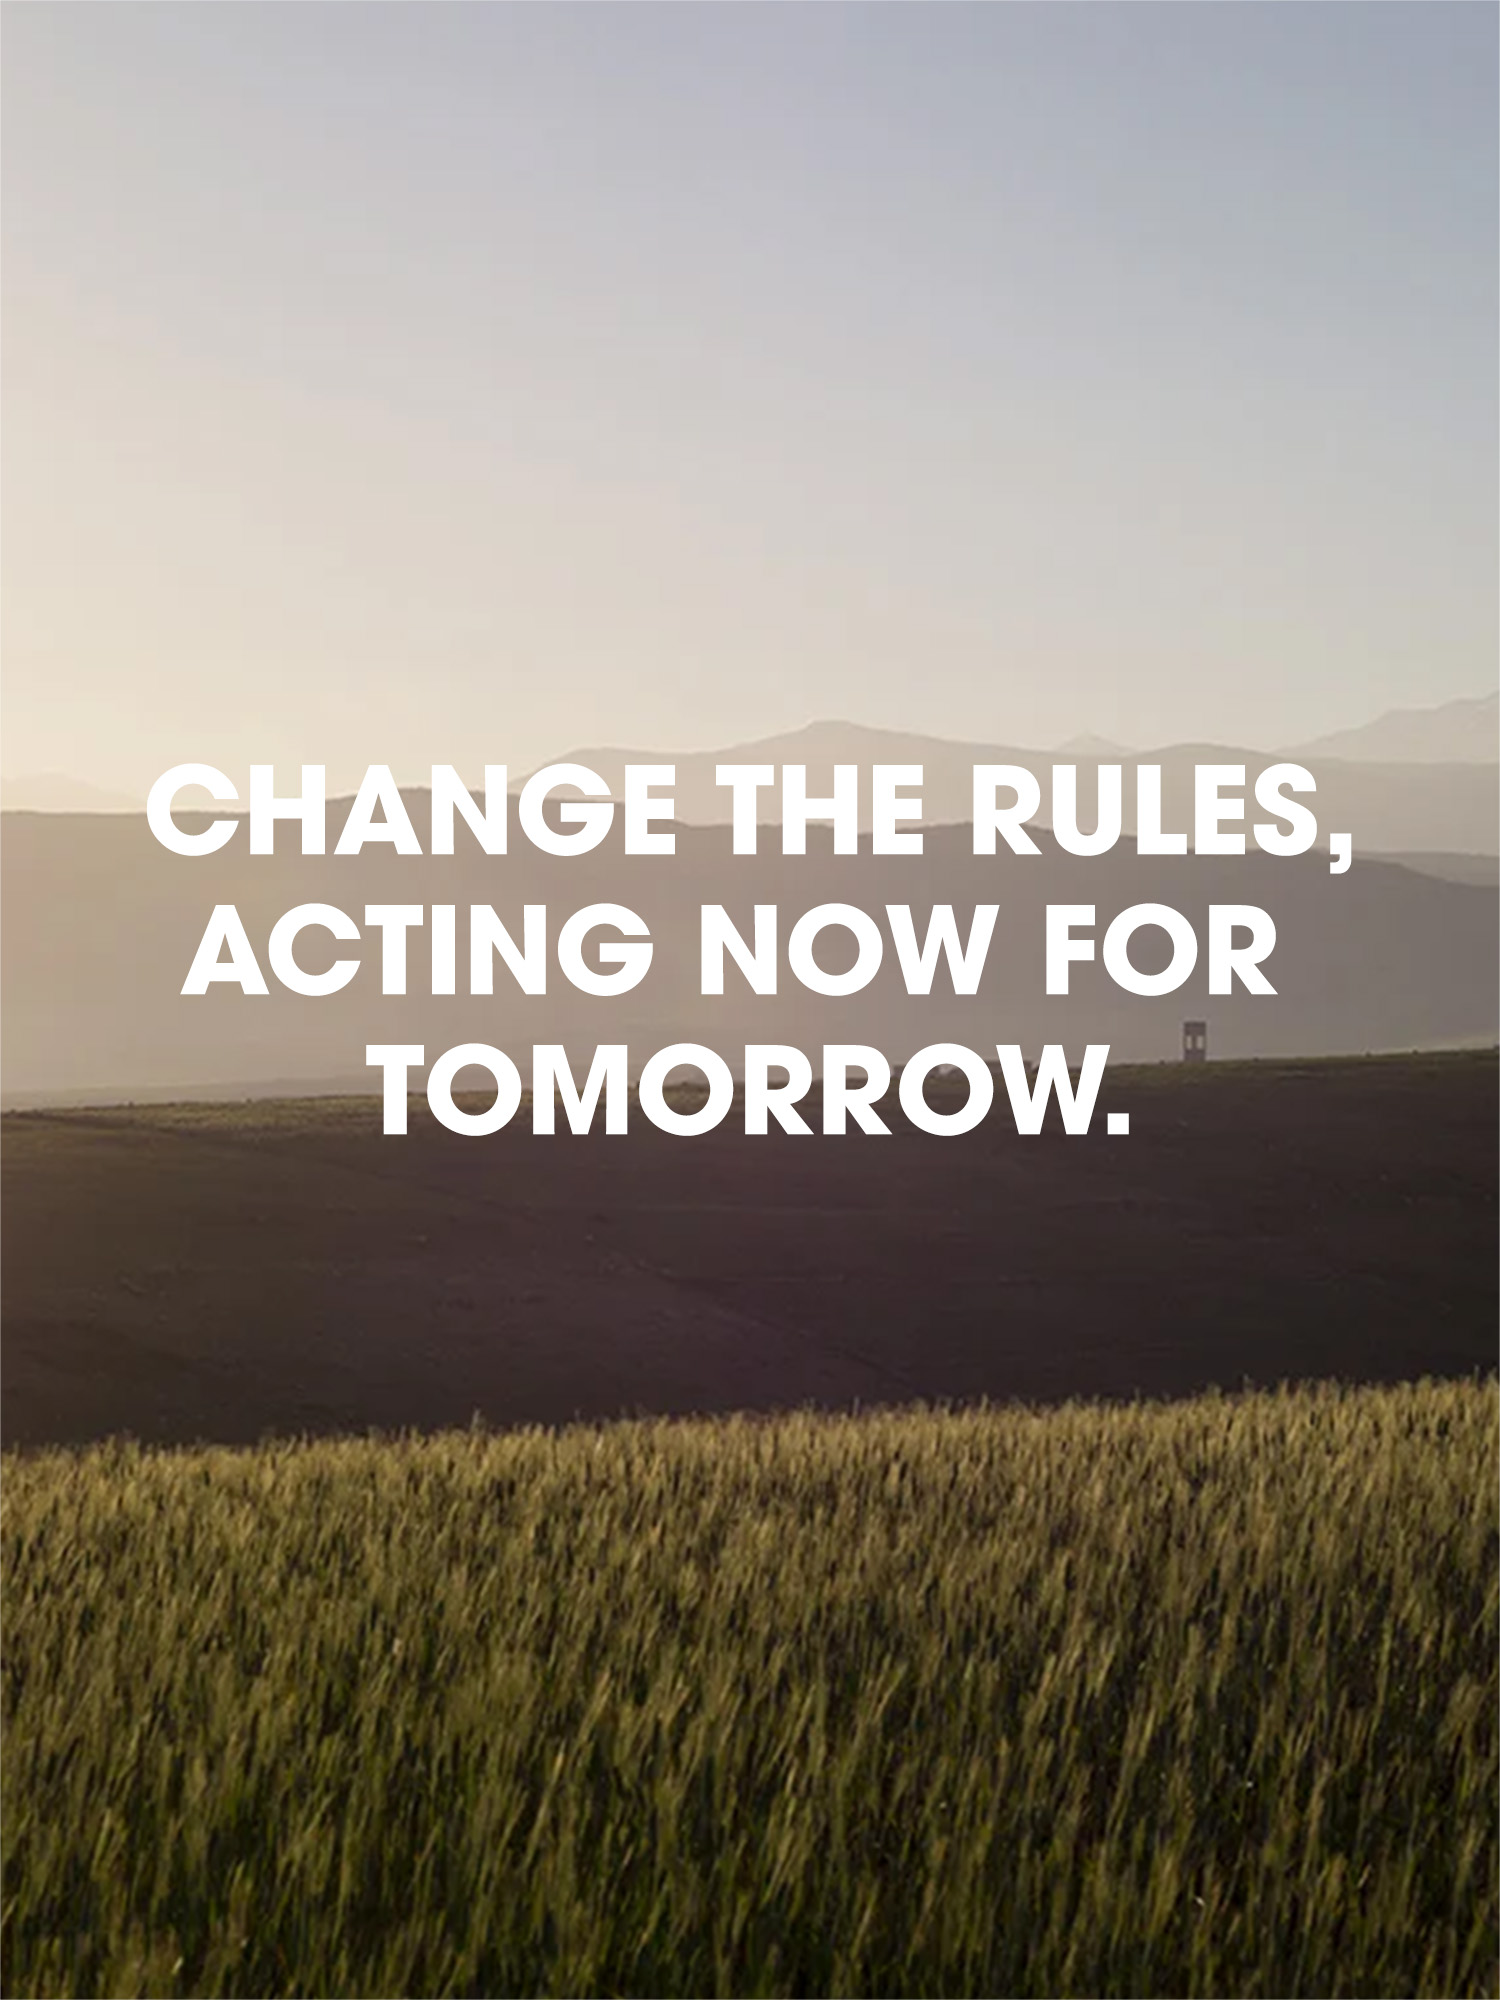 CHANGE THE RULES, ACTING NOW FOR TOMORROW.